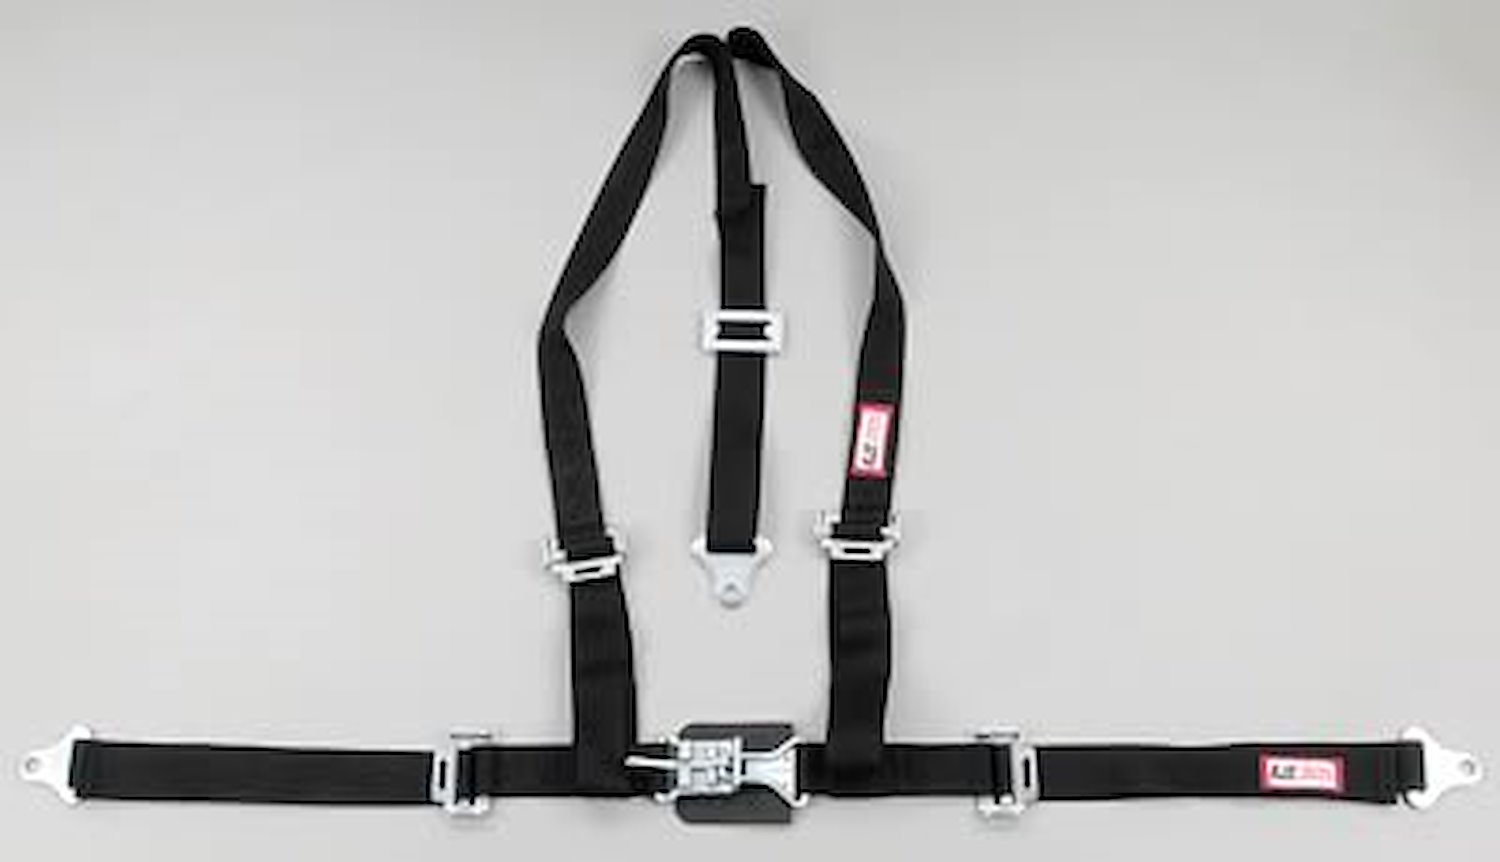 NON-SFI L&L HARNESS 3 PULL UP Lap Belt SEWN IN 2 Shoulder Harness V ROLL BAR Mount w/STERNUM STRAP ALL SNAP ENDS PURPLE